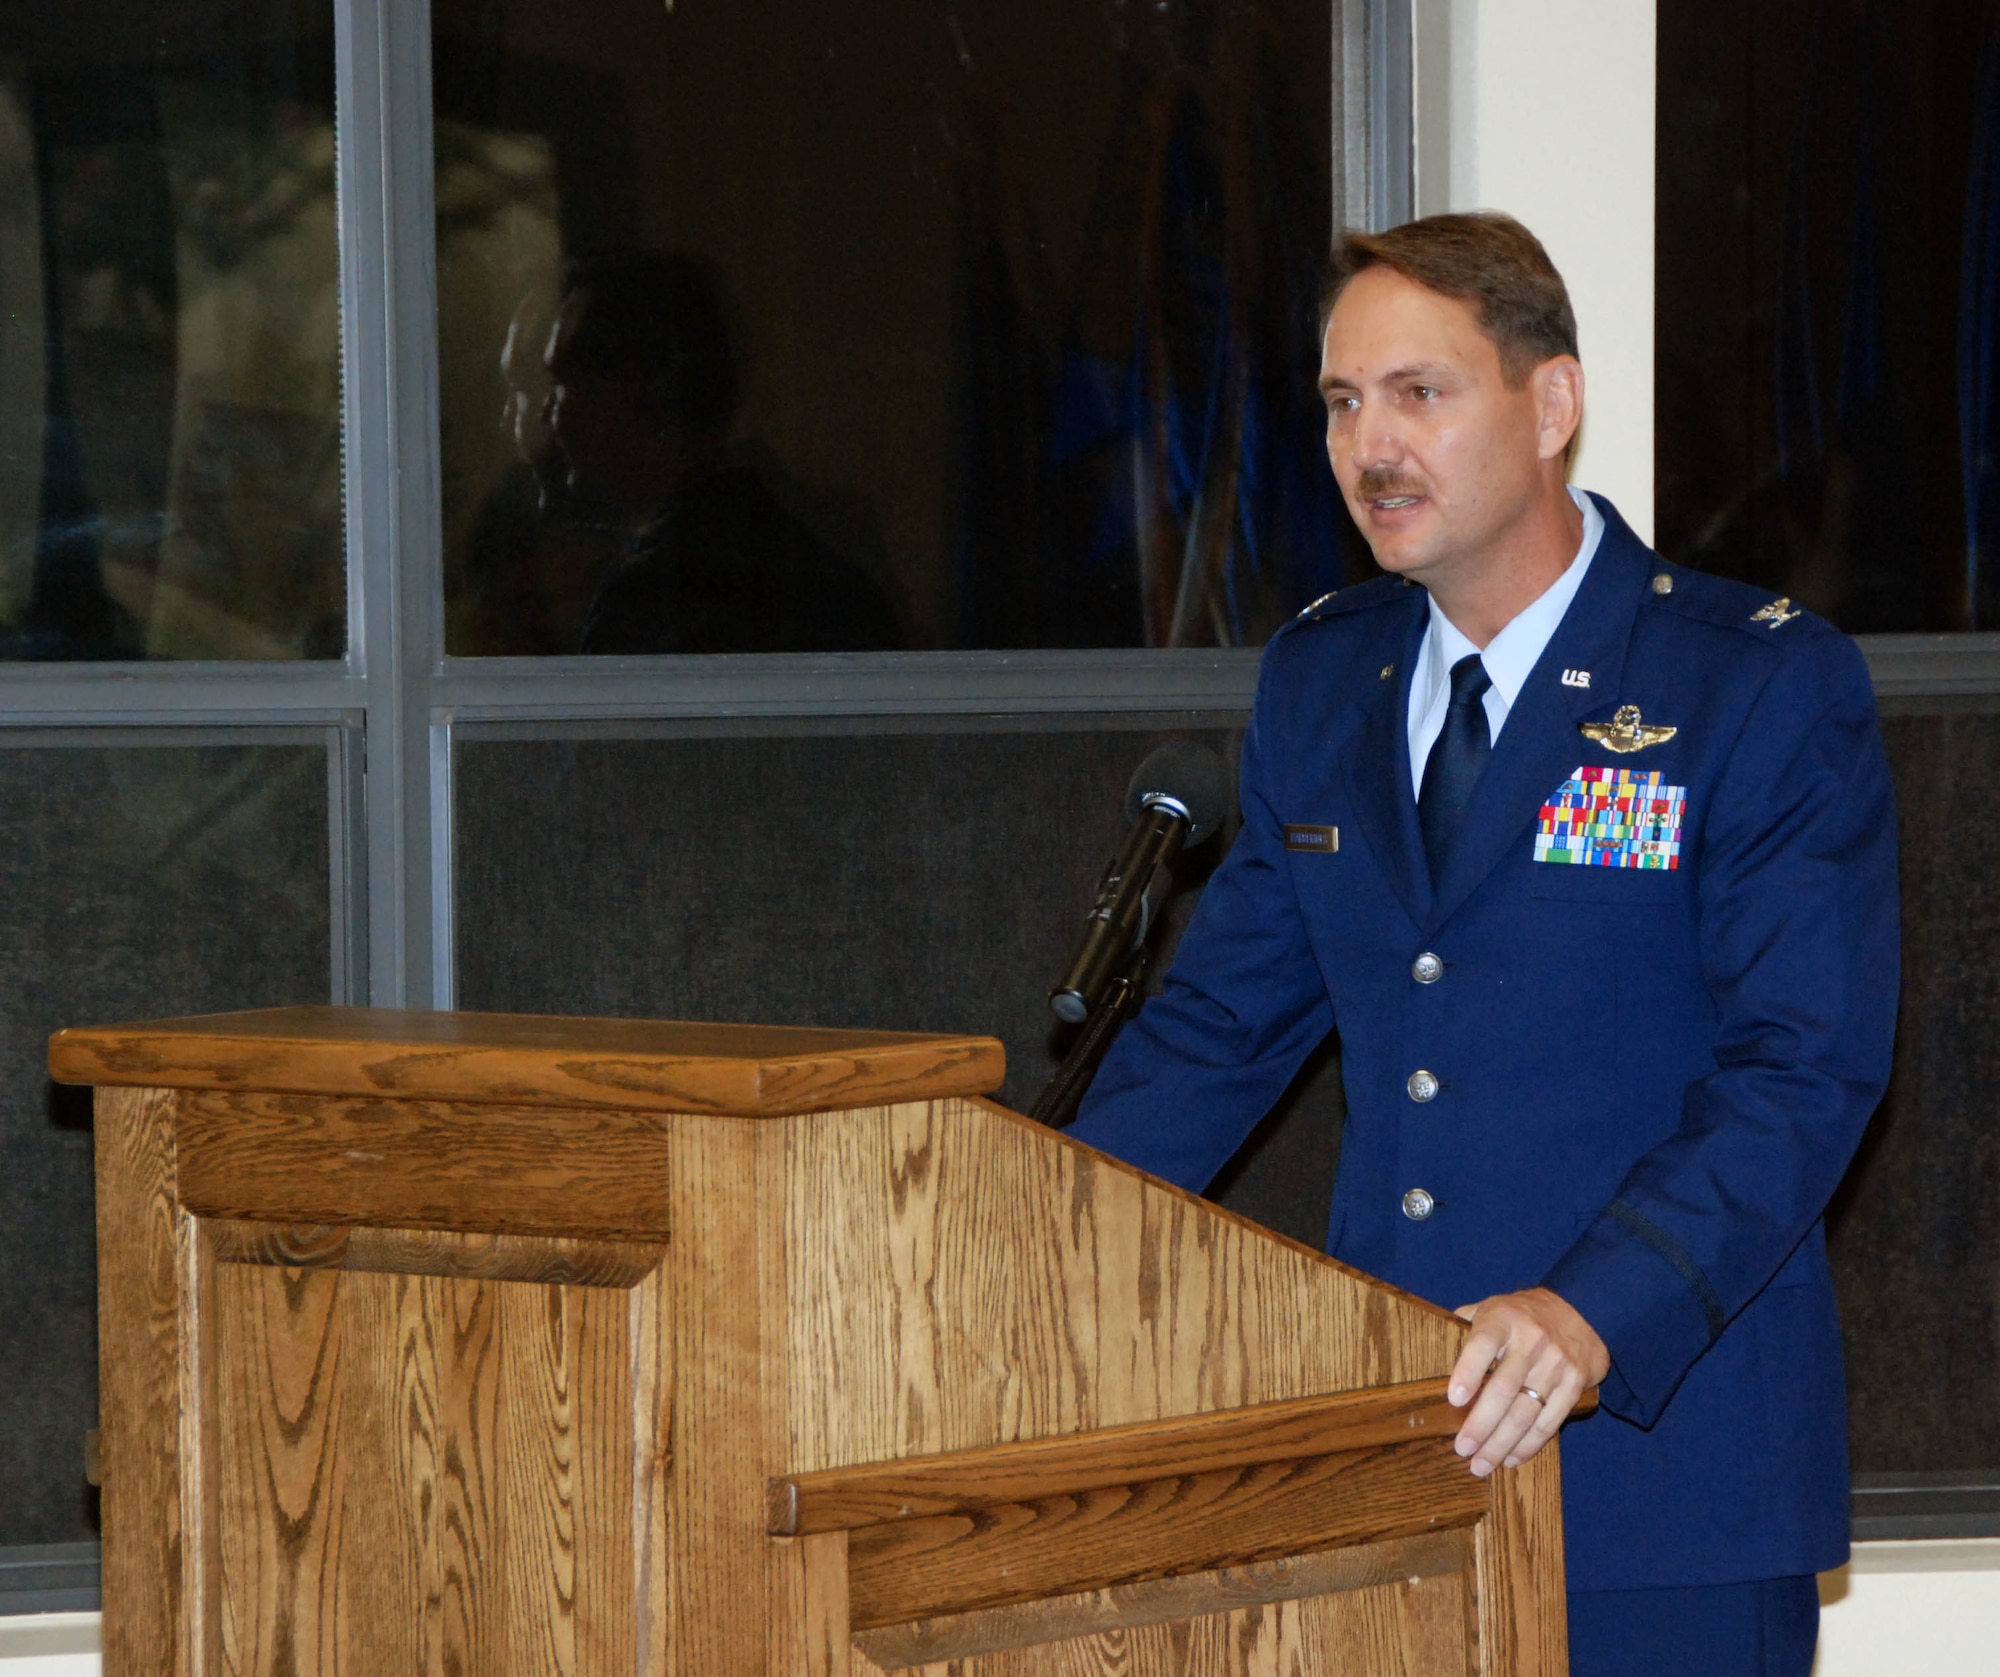 Col. Scott Barberides, 101st Air & Space Operations Group commander, gives opening remarks at the activation ceremony of his new organization Aug. 21, 2010 at Tyndall Air Force Base, Fla.  (U.S. Air Force photo by Capt. Jared Scott)